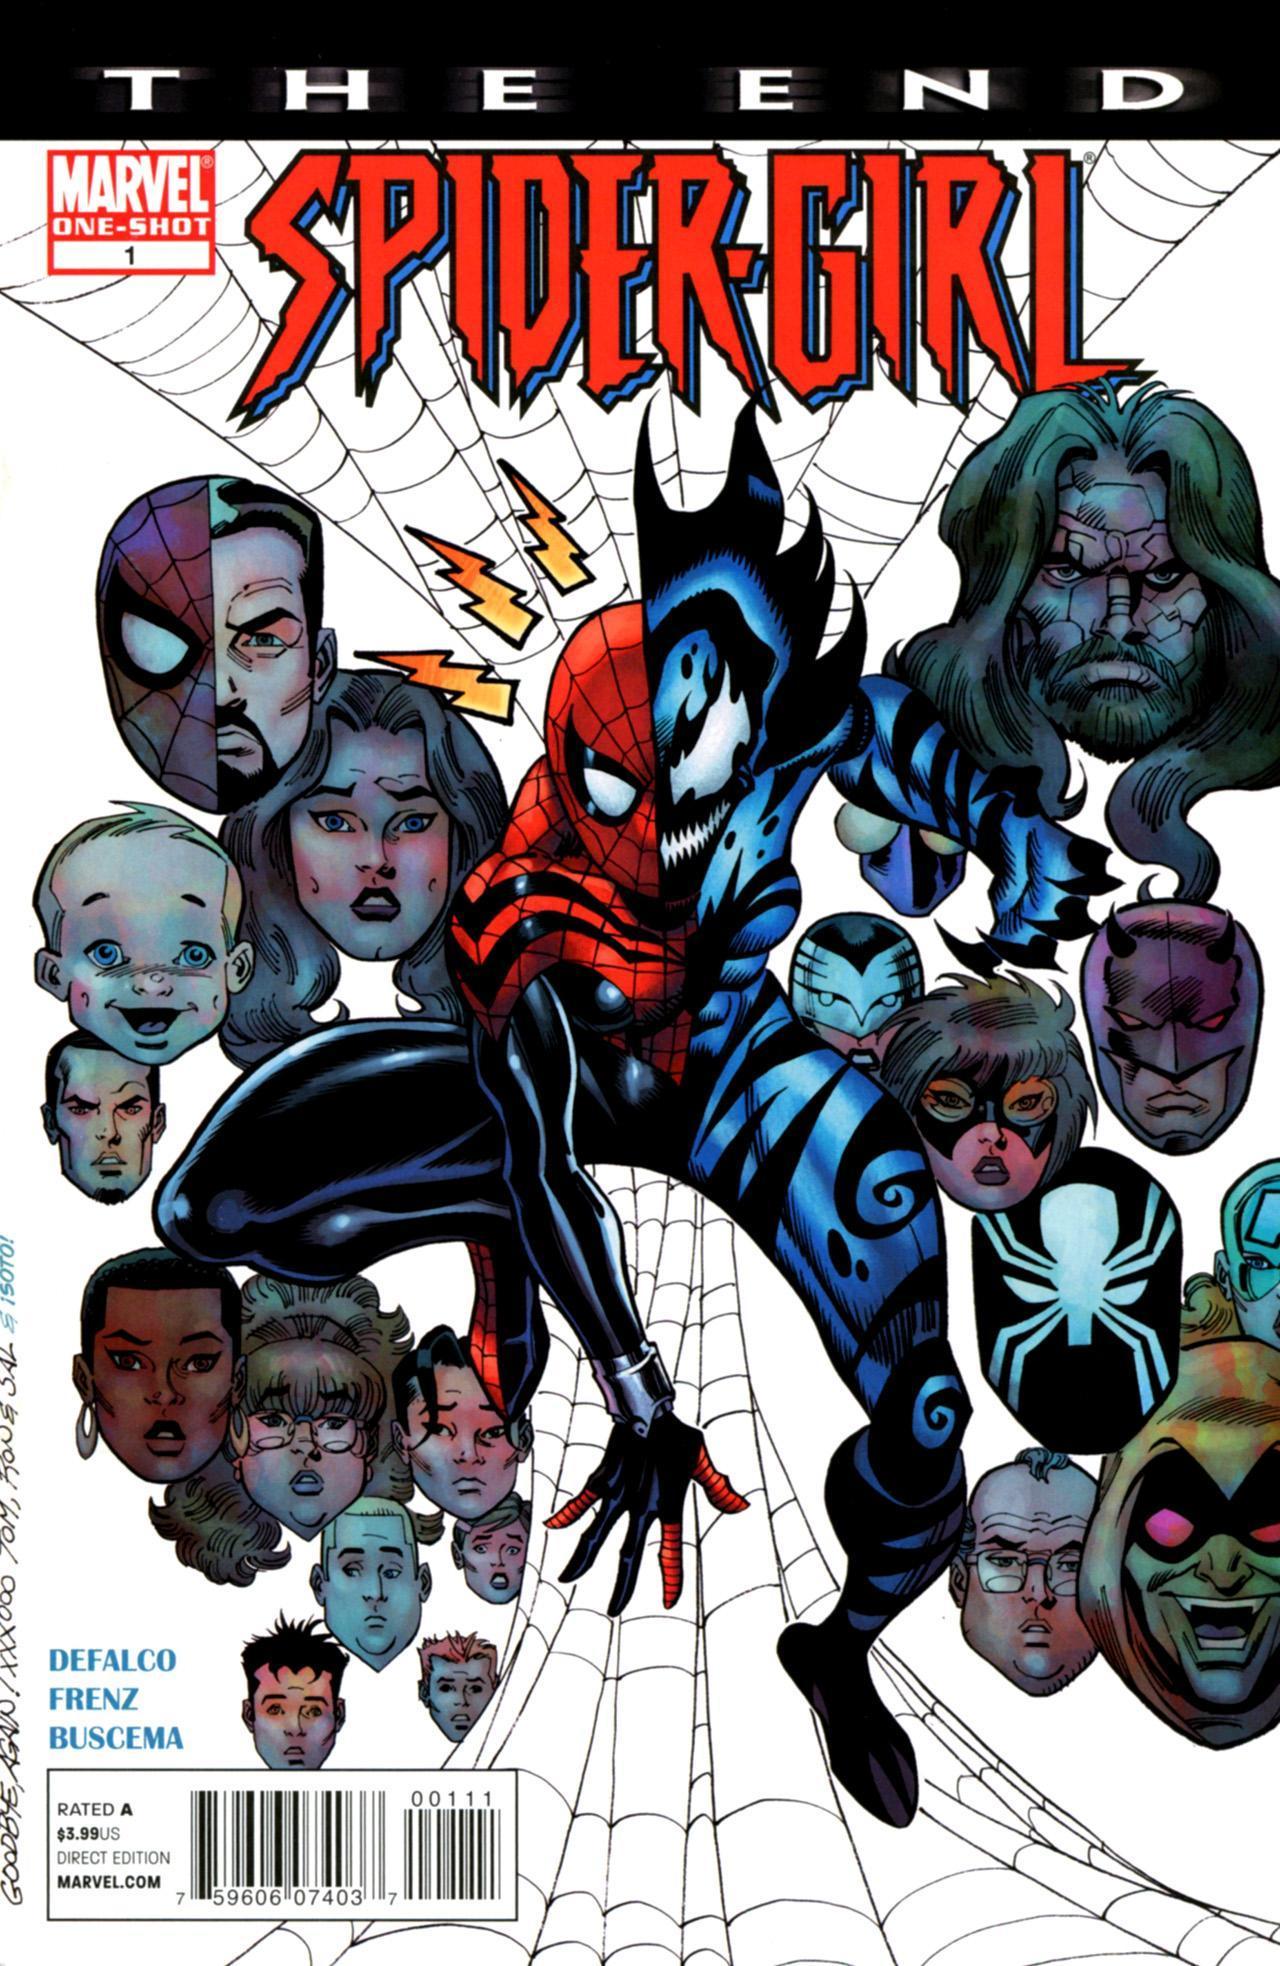 Spider-Girl: The End! Vol. 1 #1